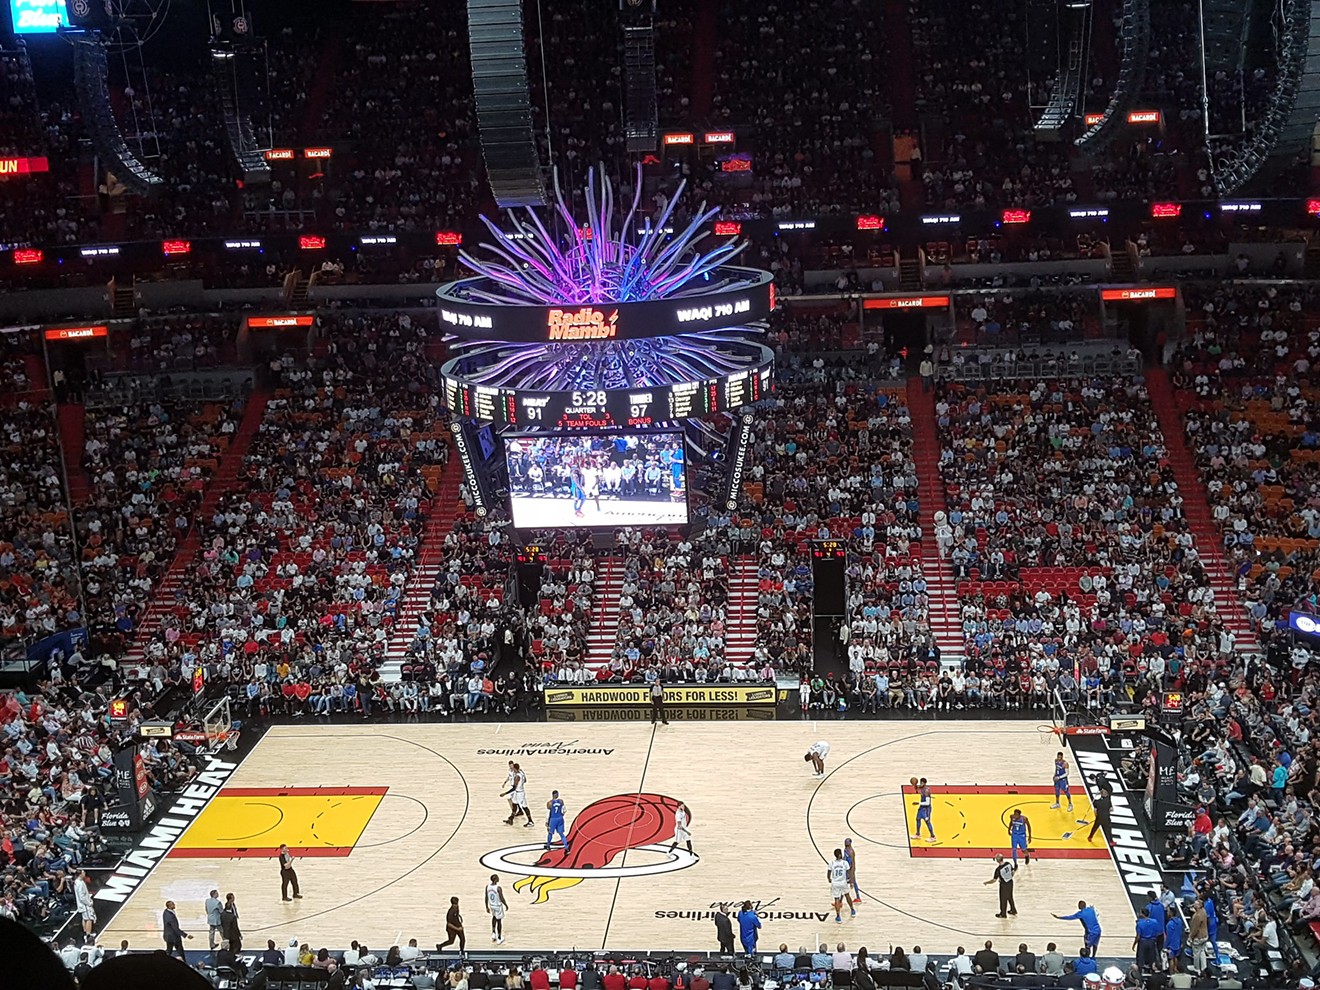 Miami Heat at American Airlines Arena